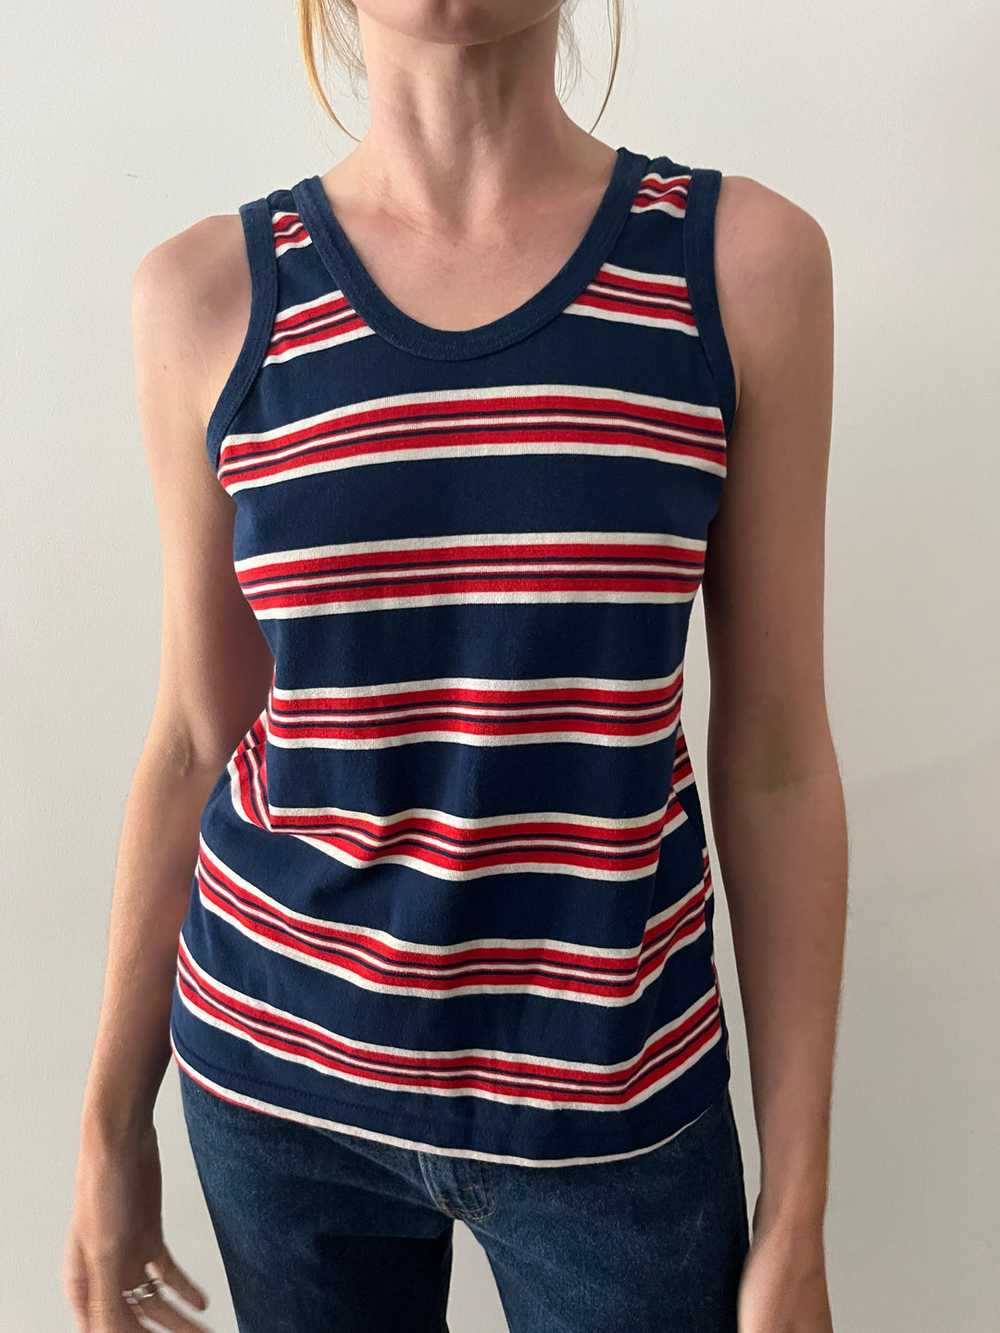 70s Red White & Blue Striped Tank - image 1